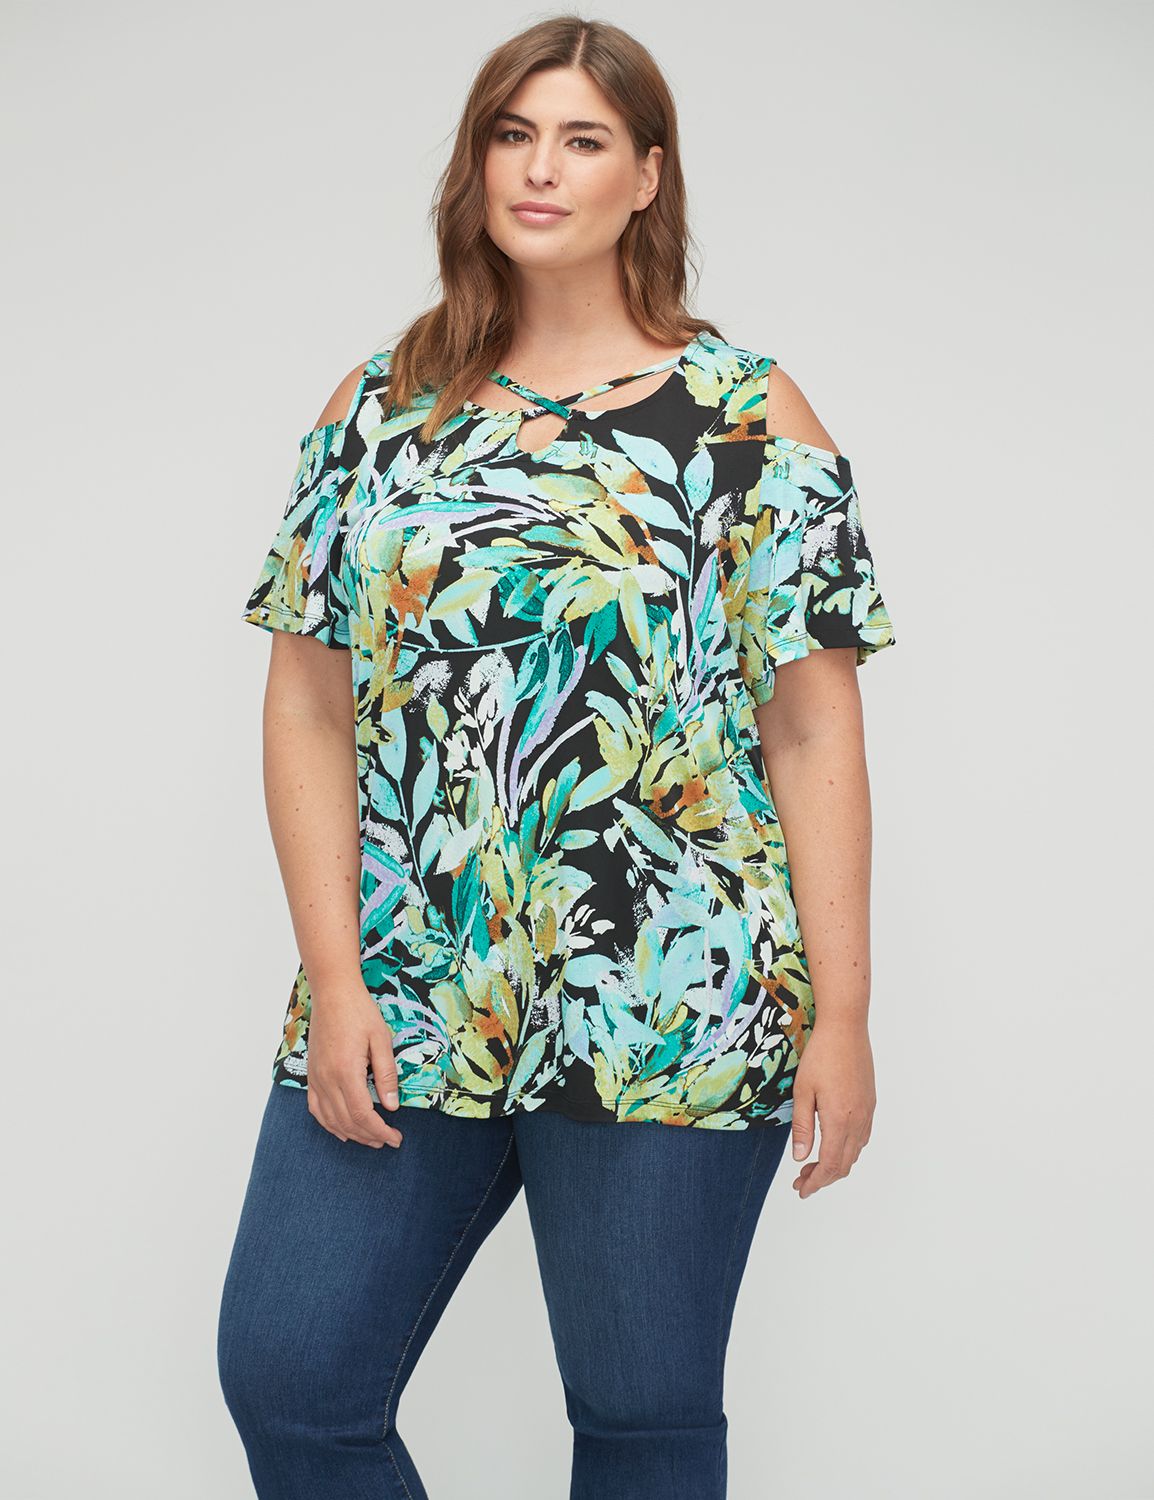 plus size tops for women